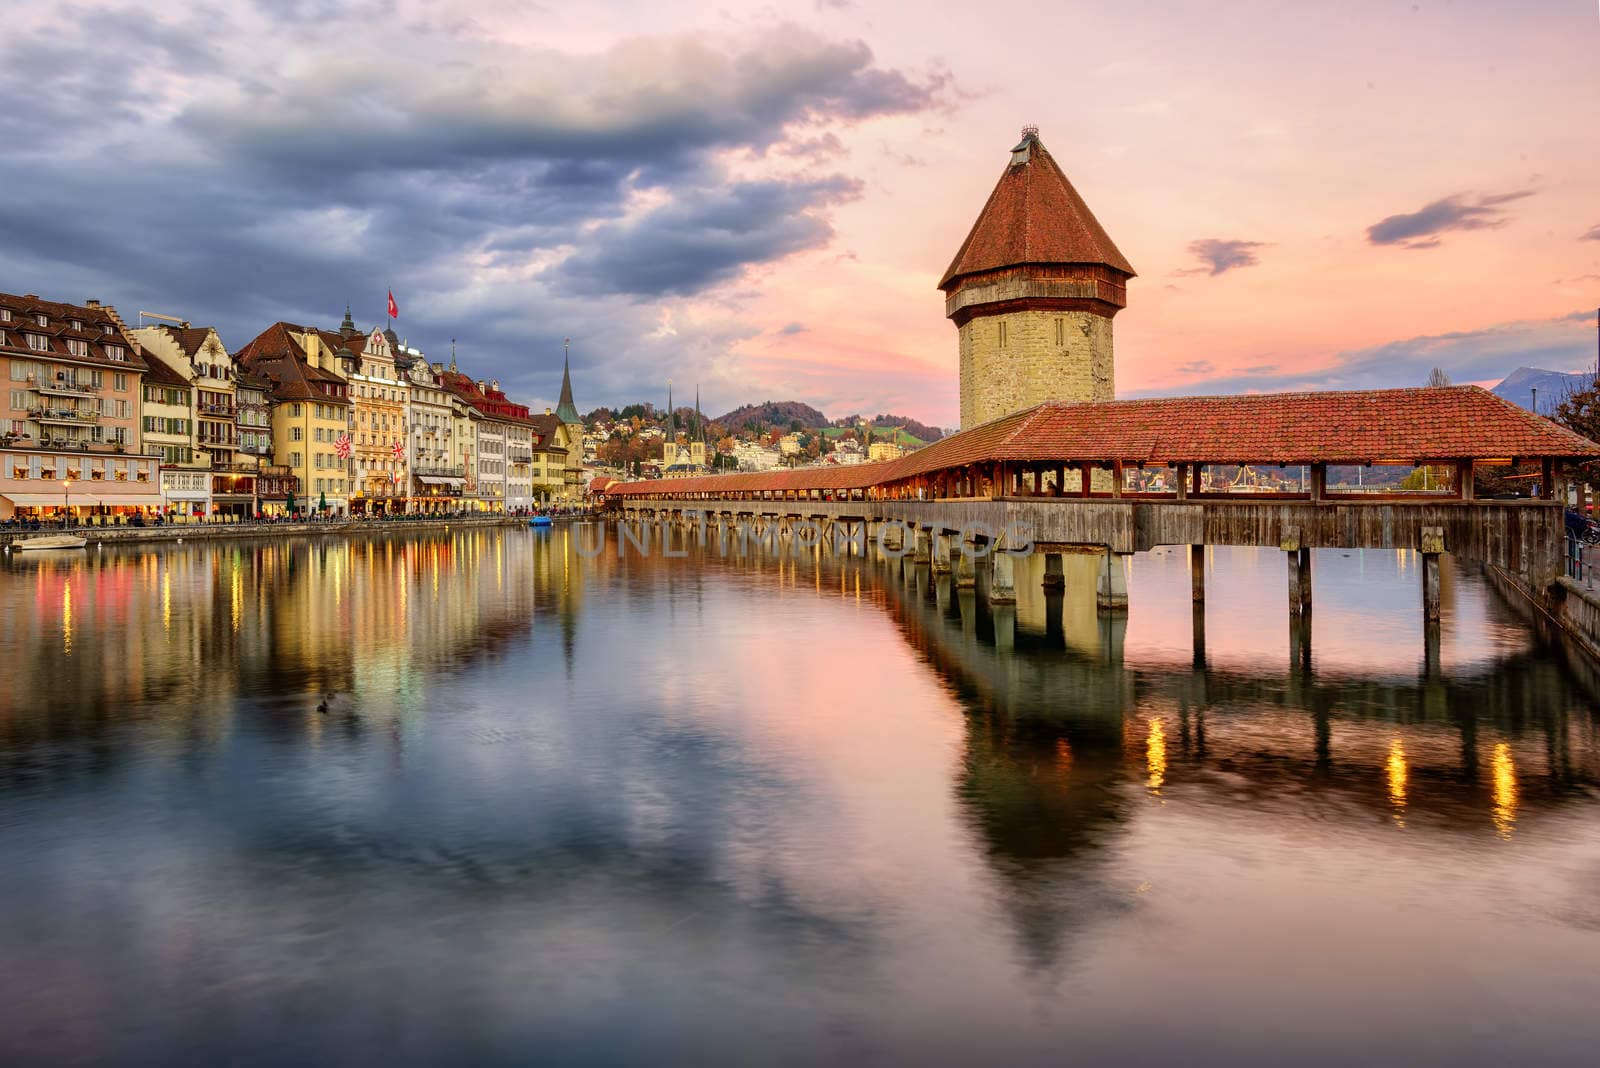 Wooden Chapel Bridge and Water Tower on sunset, Lucerne, Switzer by GlobePhotos